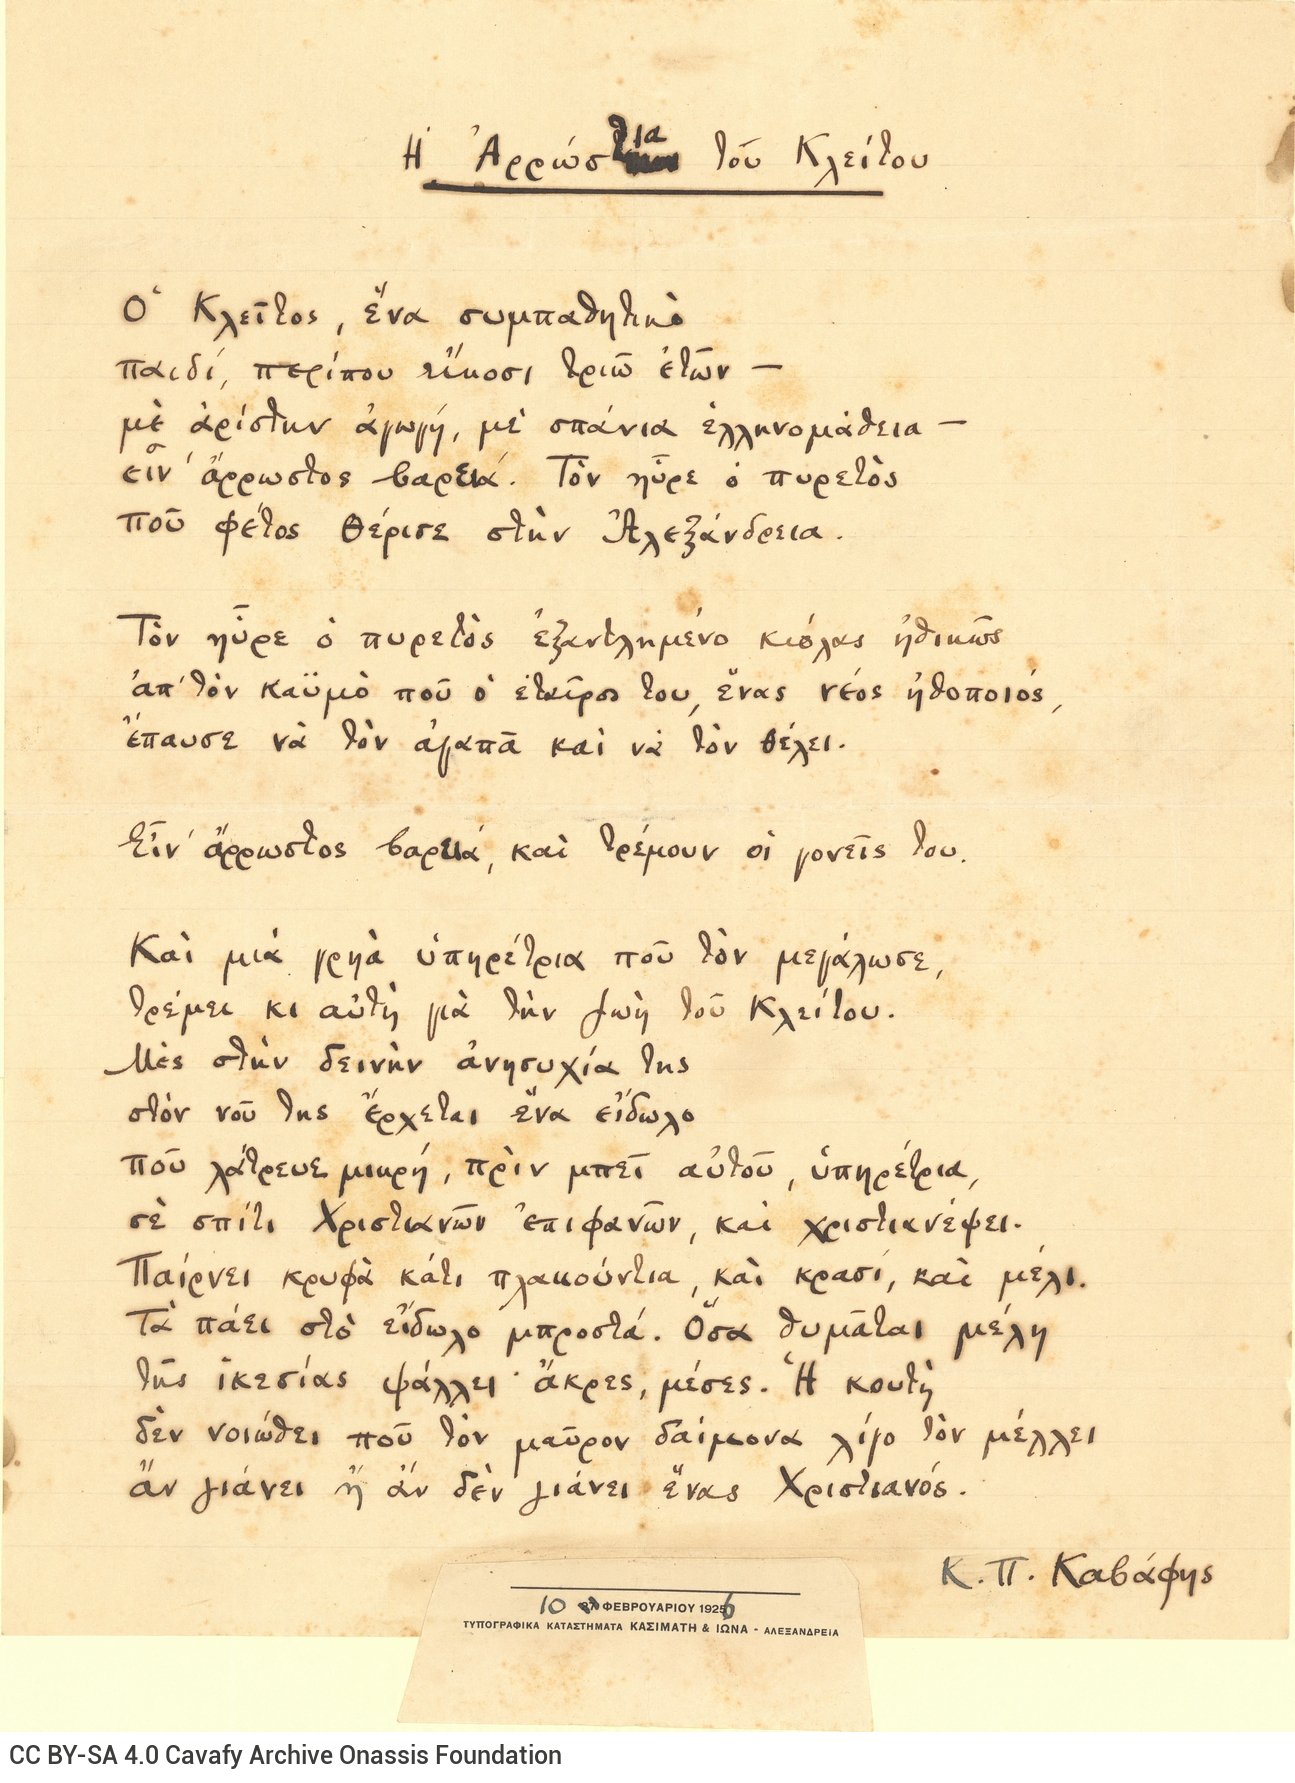 Autograph manuscript of the poem "Cleitus's Illness" on one side of a ruled sheet. At the bottom, affixed piece of paper with